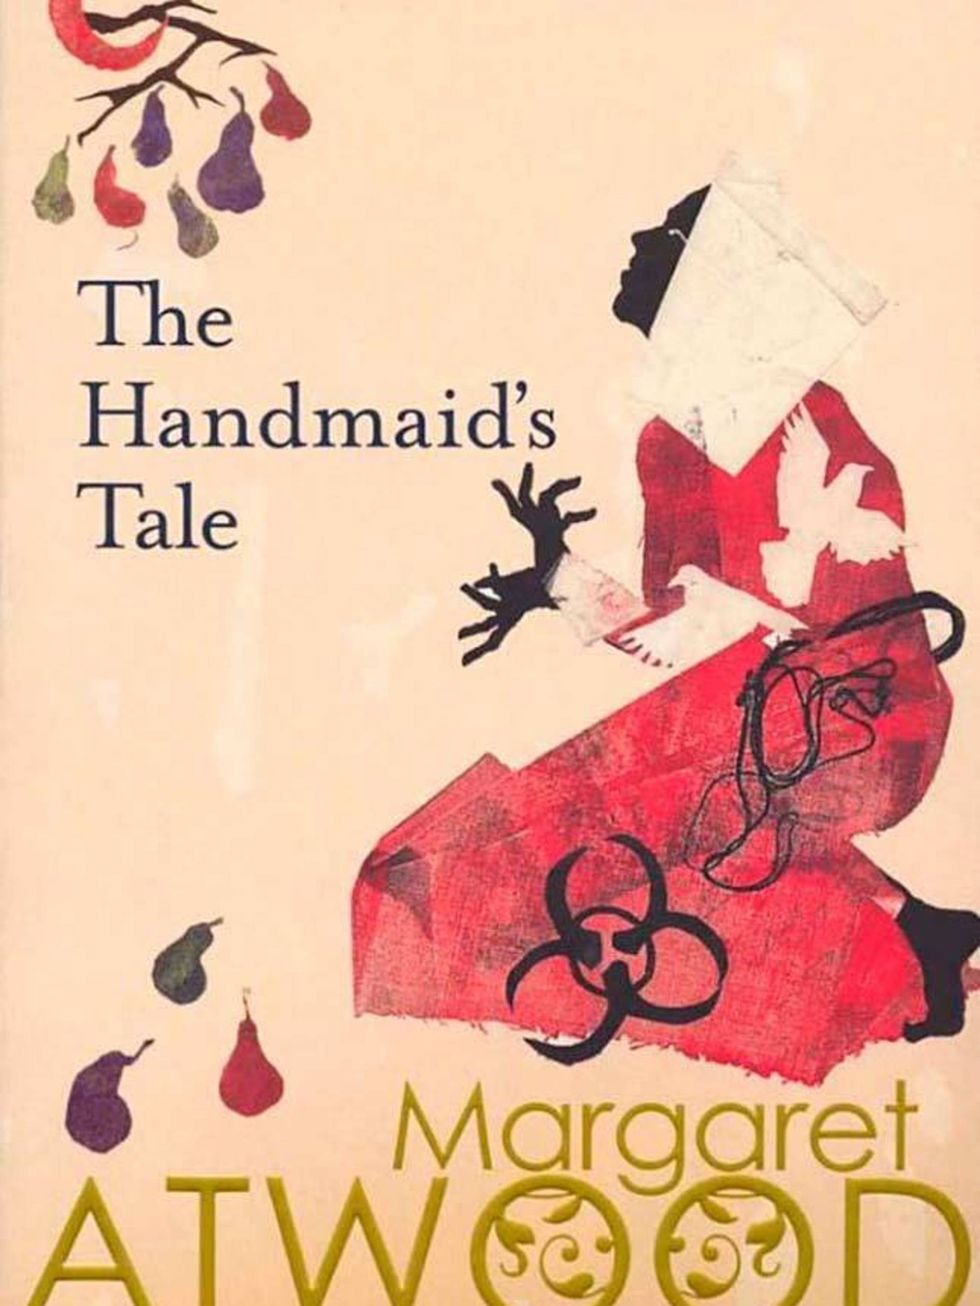 <p>The Handmaid&rsquo;s Tale by Margaret Atwood</p>

<p>Set in a near dystopian future, this hugely influential novel follows Offred, a handmaid to an important official in the fictional Republic of Gilead, there to provide him and his wife with children.